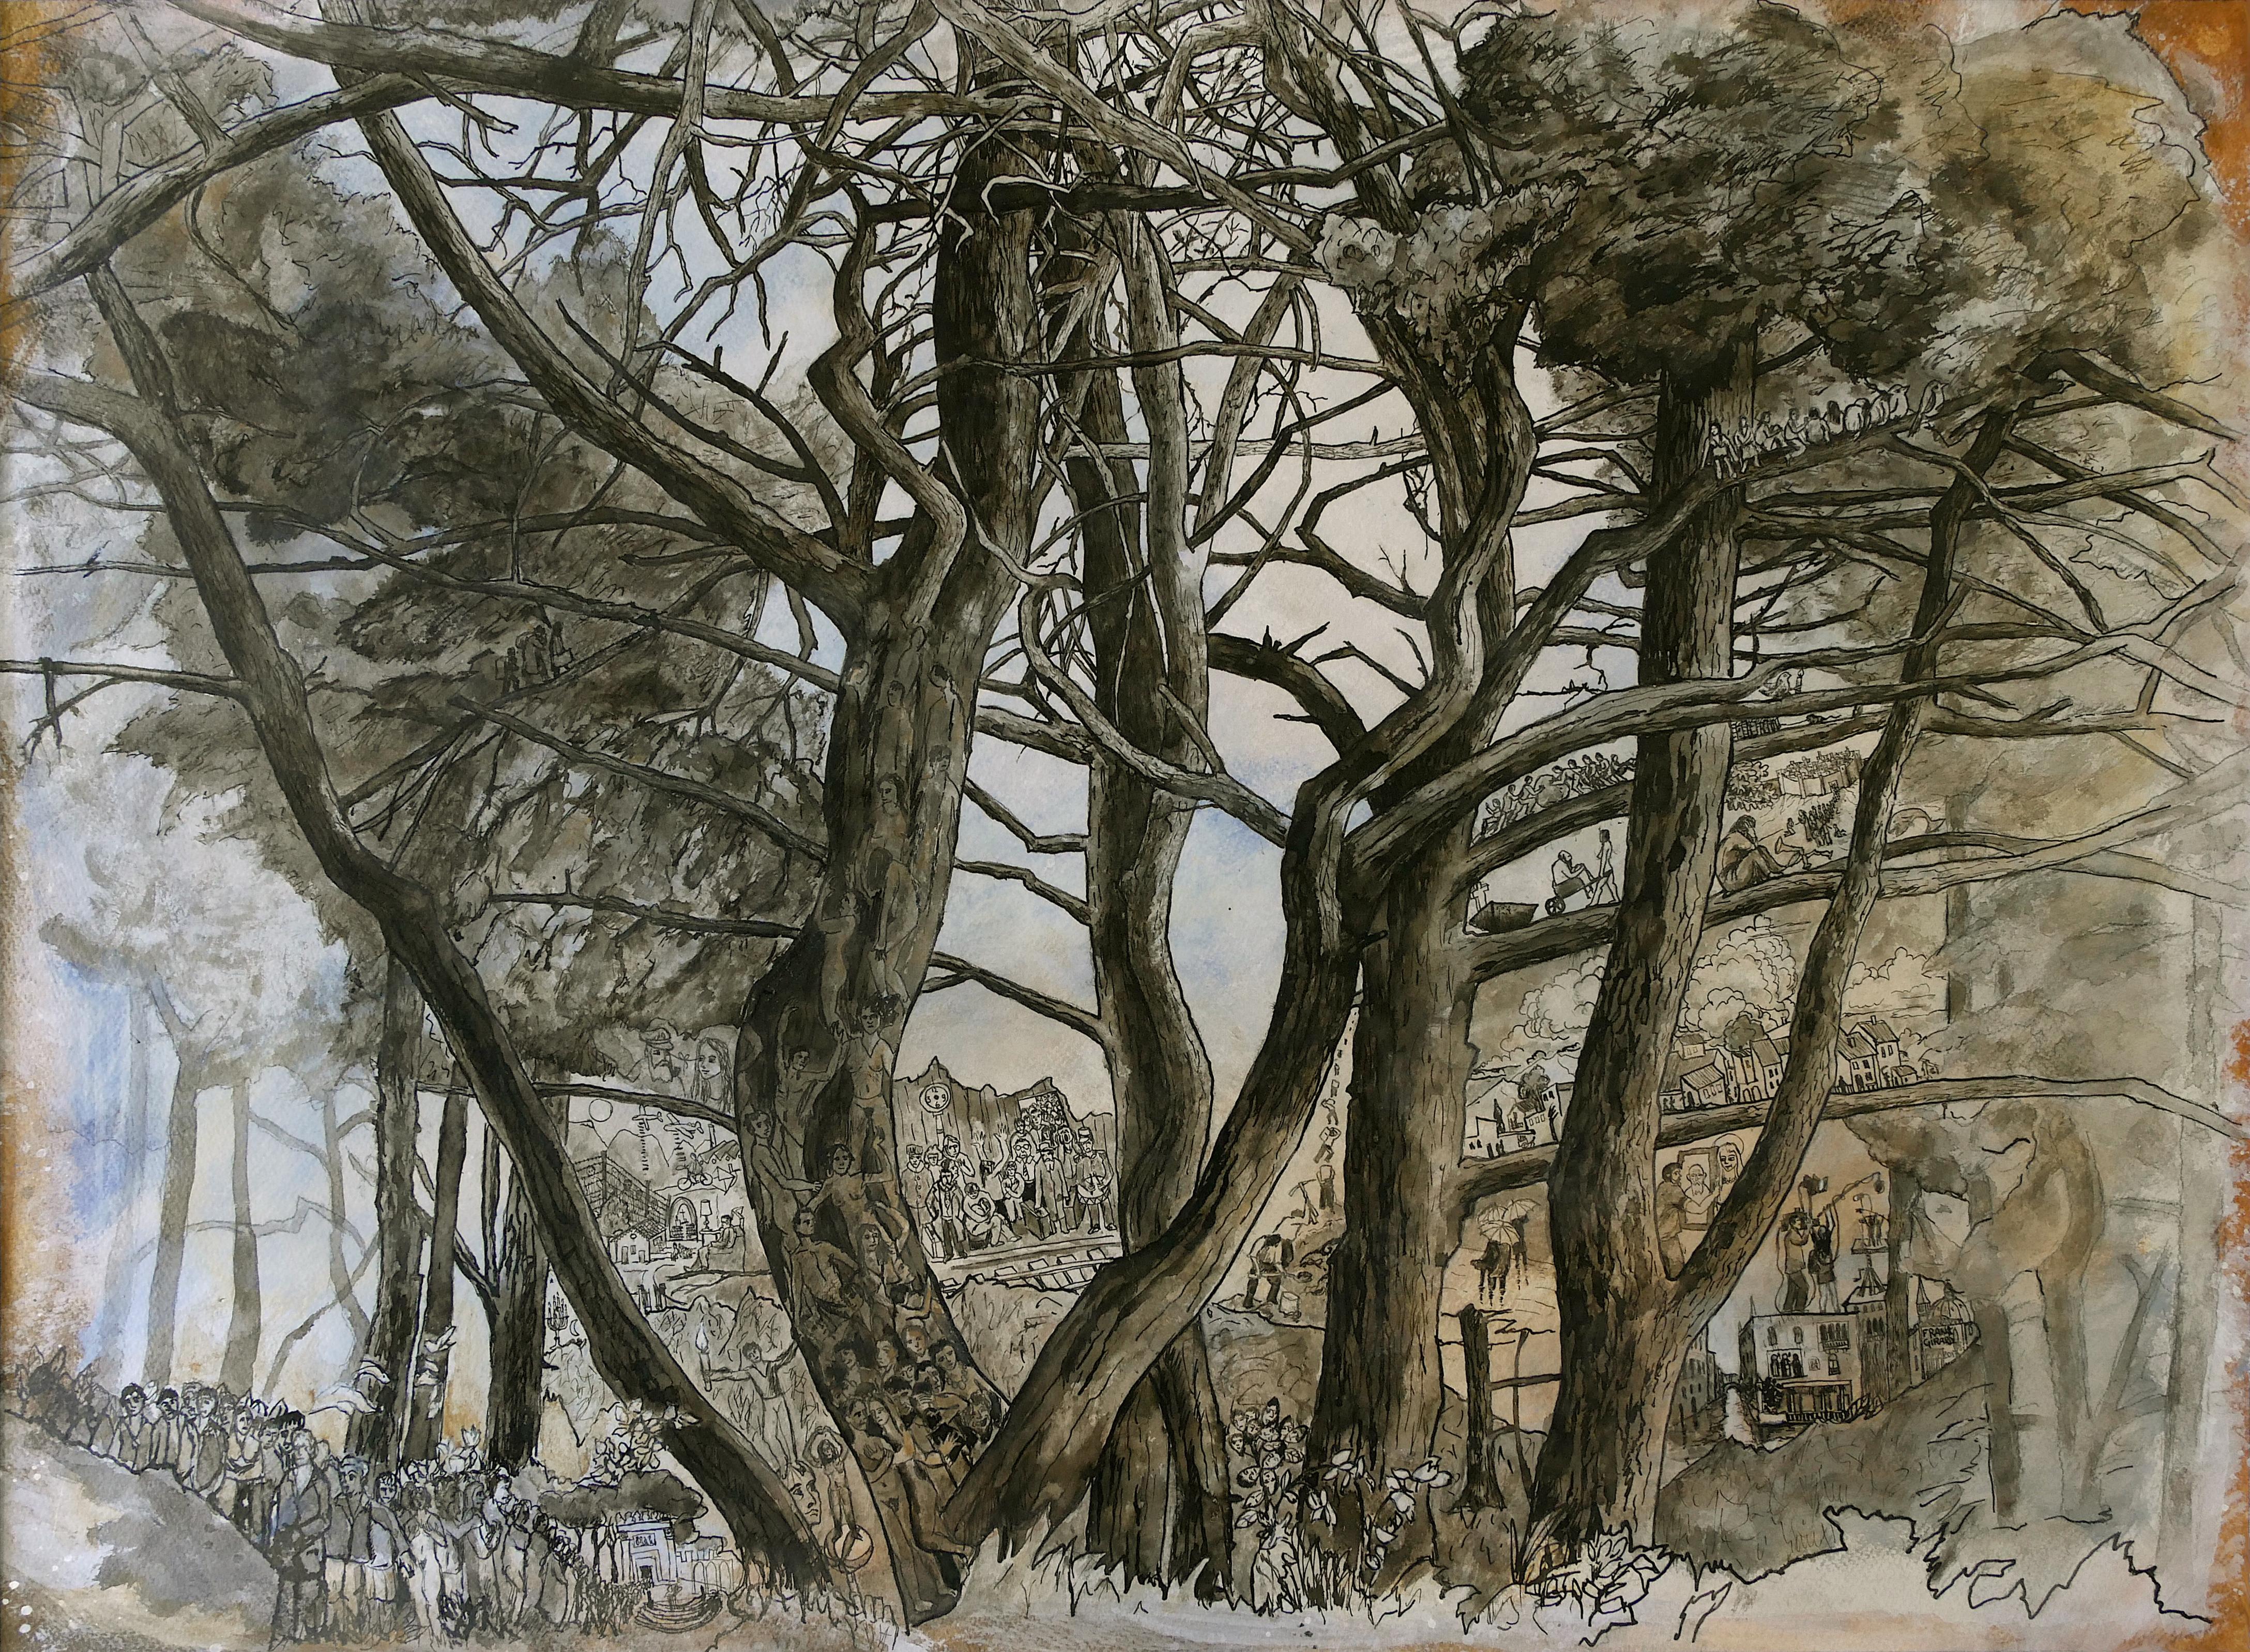 Frank Girard Landscape Art - "Old Oaks", Trees Inhabited by Human in Nature, Drawing and Pigments on Paper